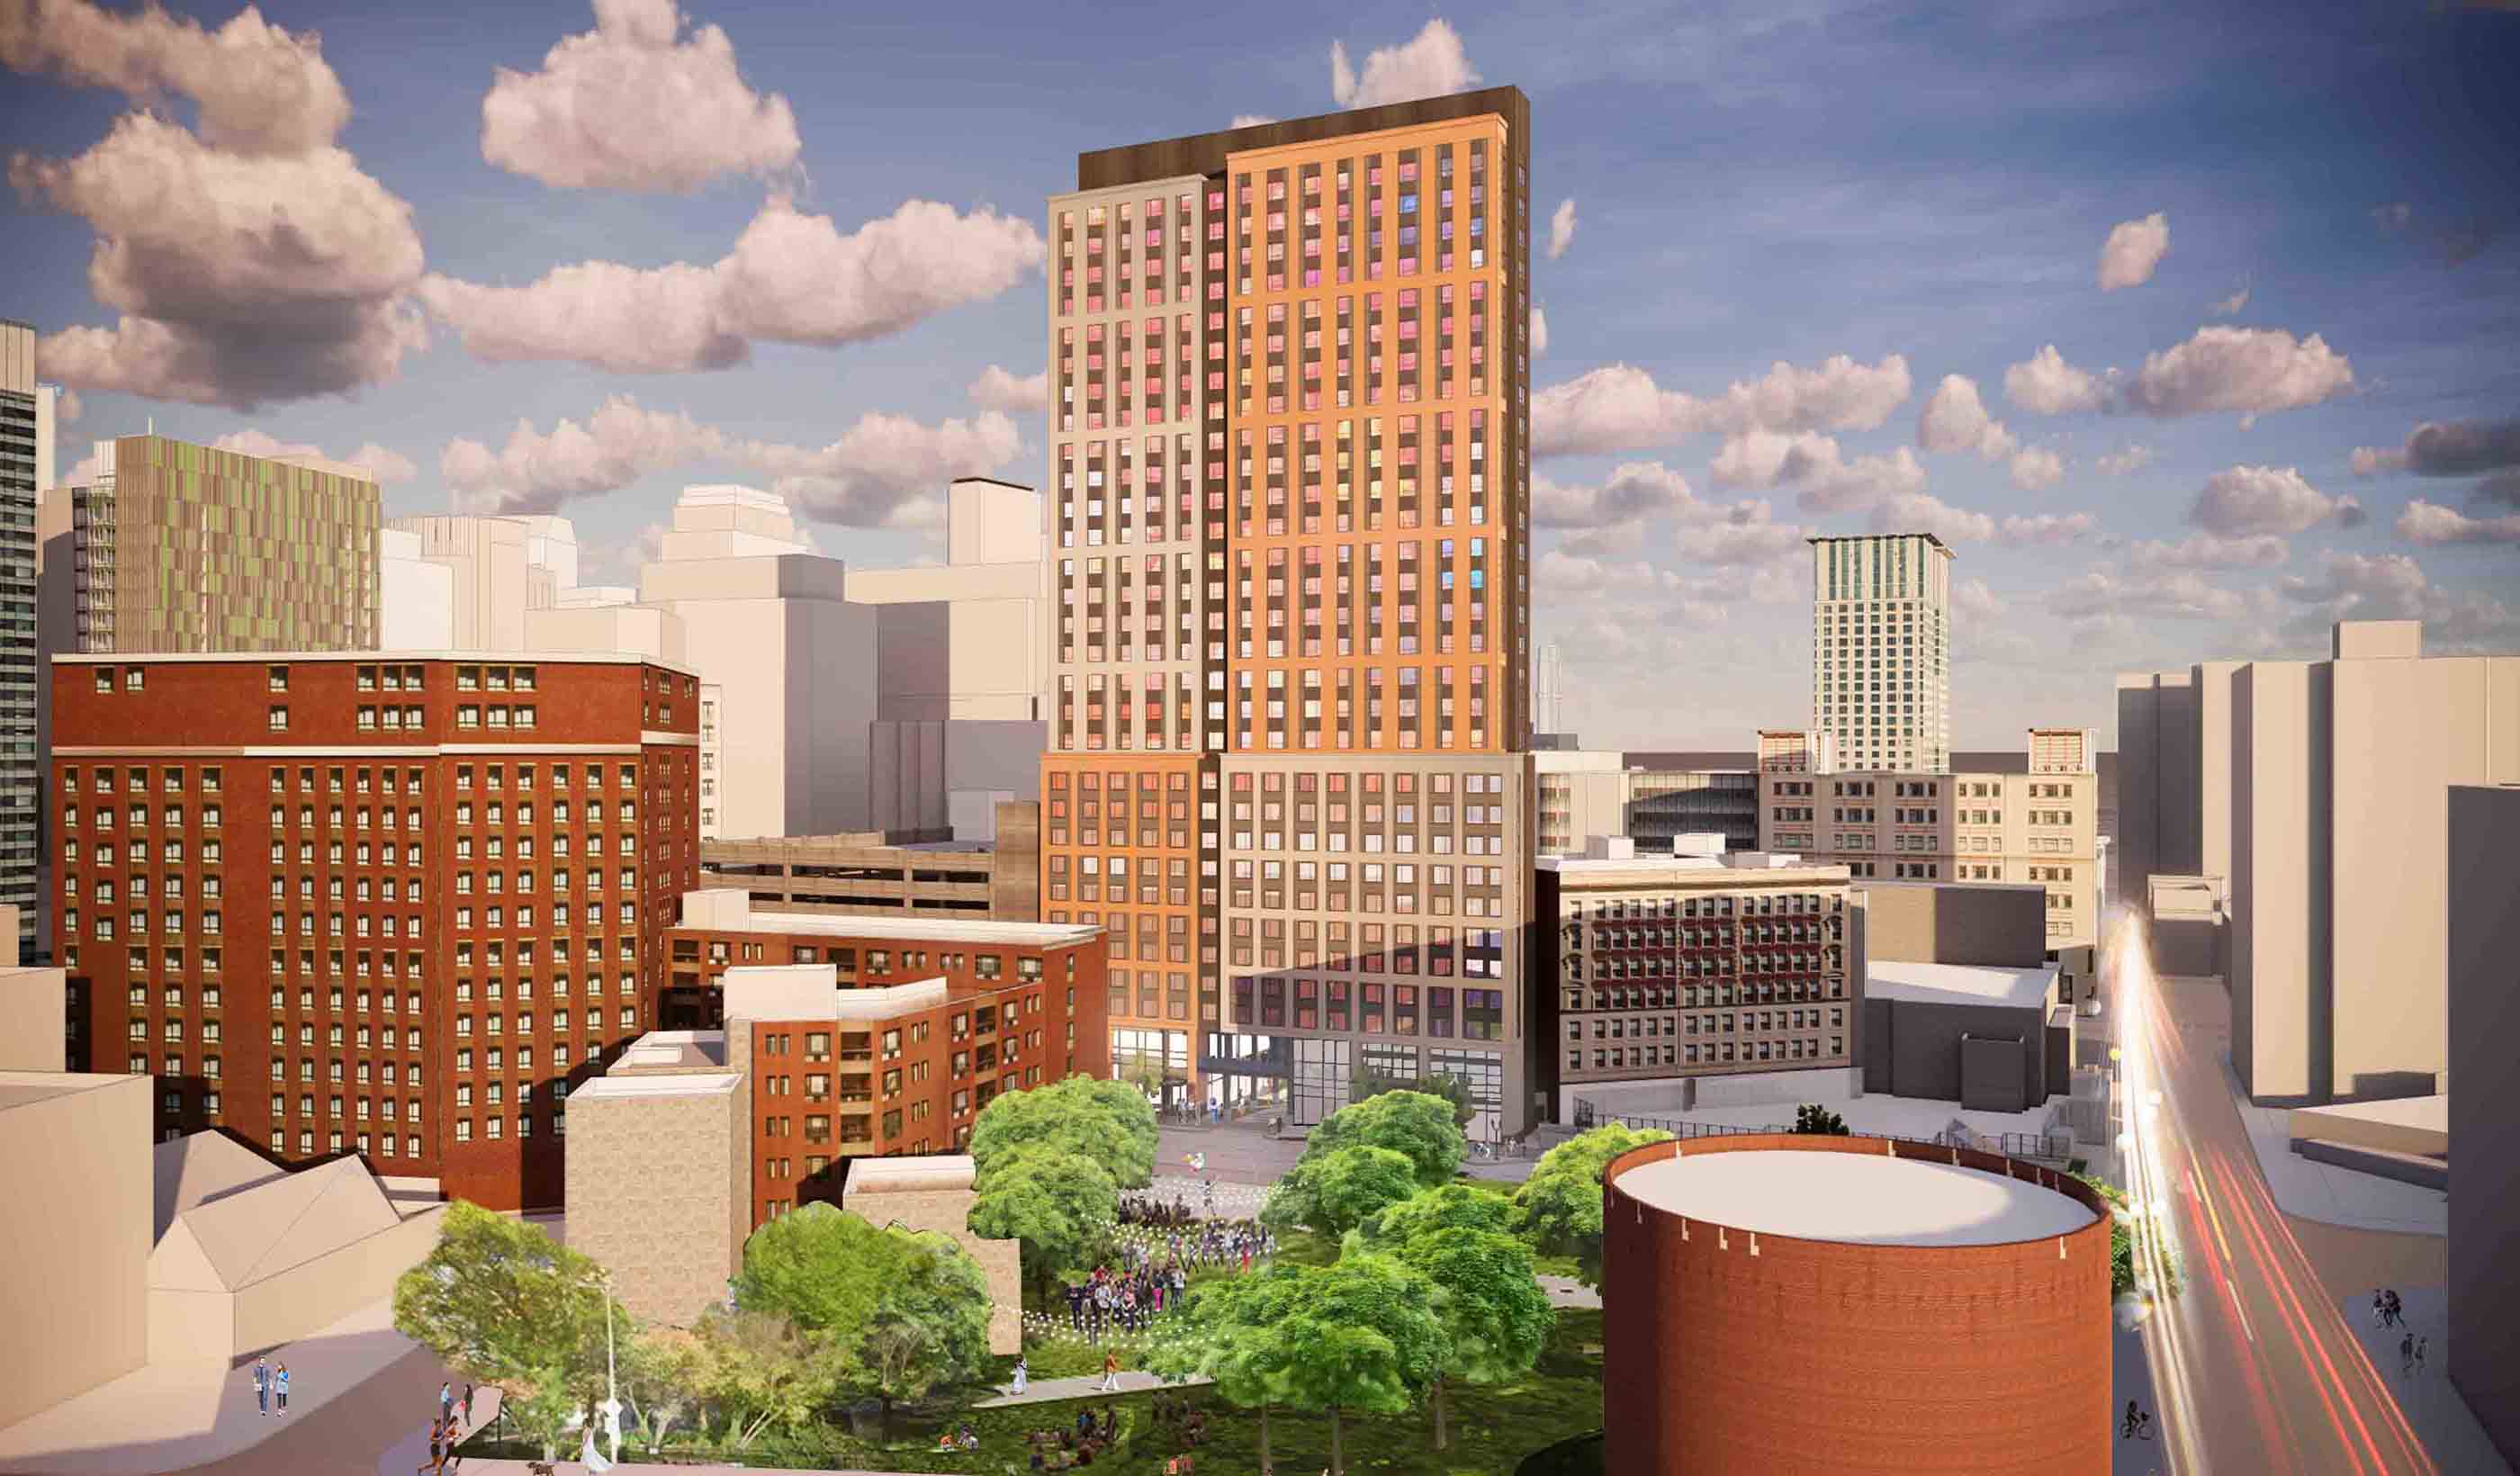 Published in The Boston Globe: New high-rise in Chinatown will include affordable housing